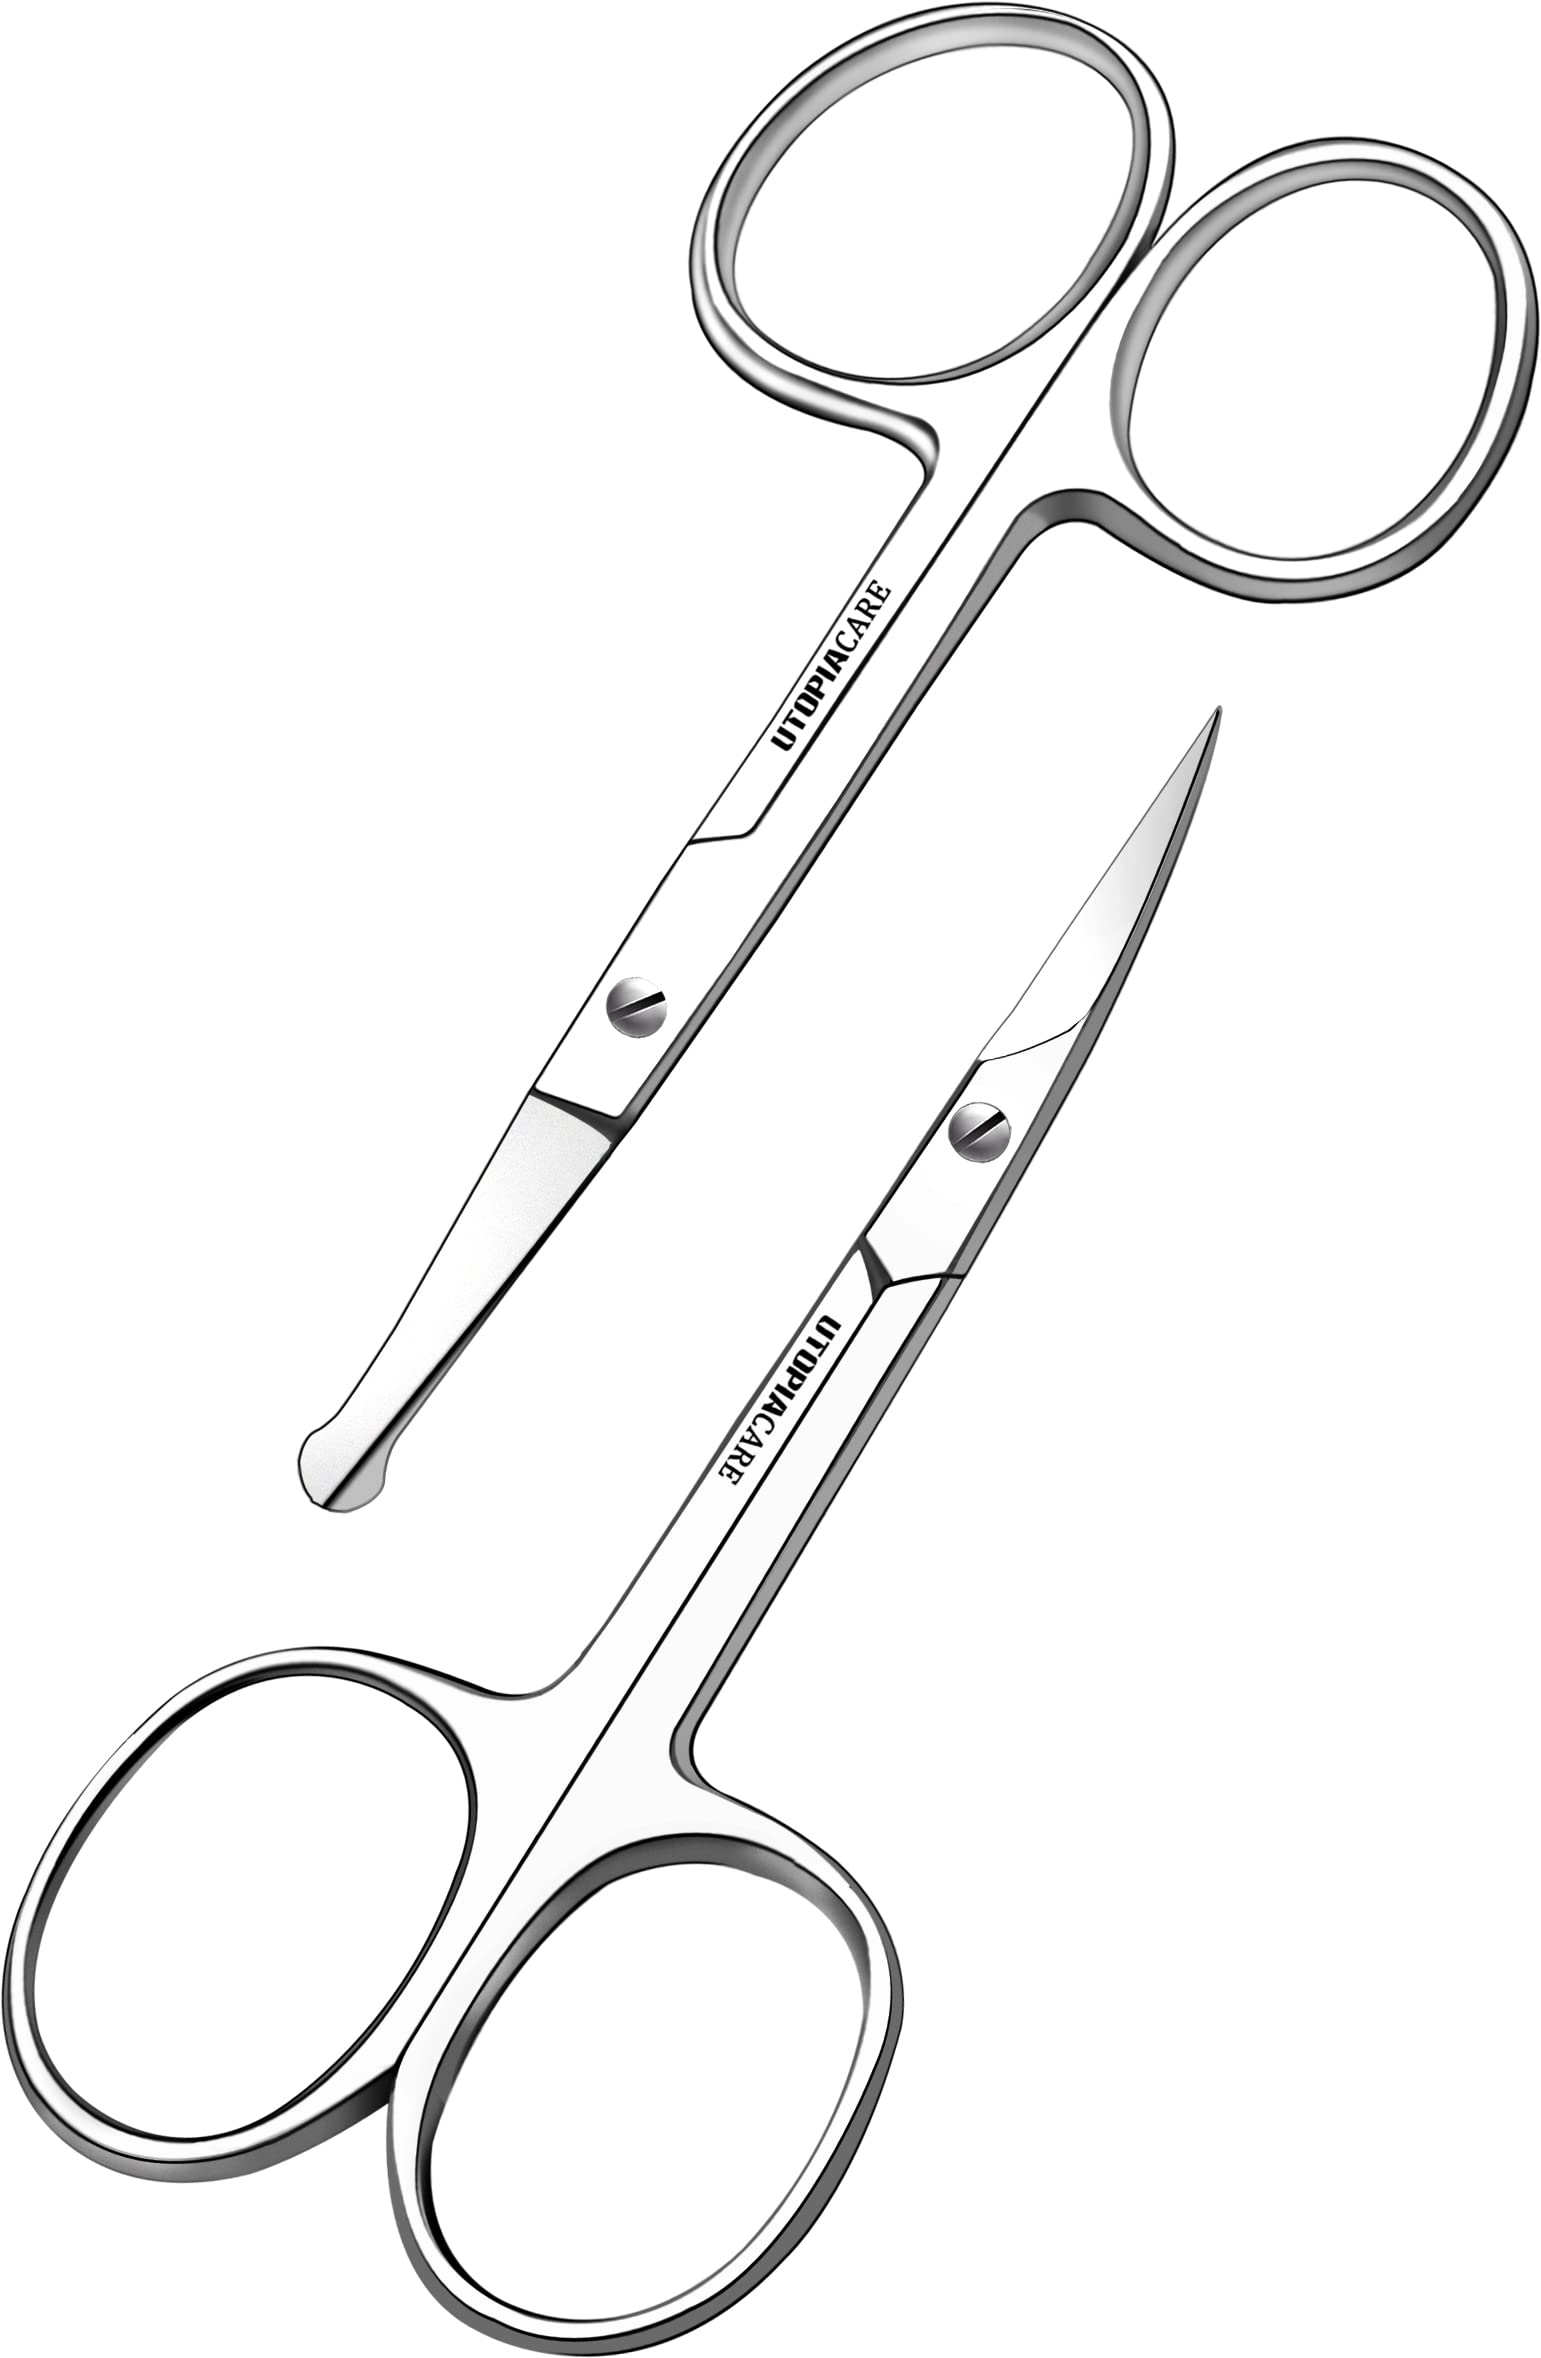 tæppe knoglebrud atlet Utopia Care - Curved and Rounded Facial Hair Scissors for Men - Mustache  Nose Hair Beard Trimming Scissors